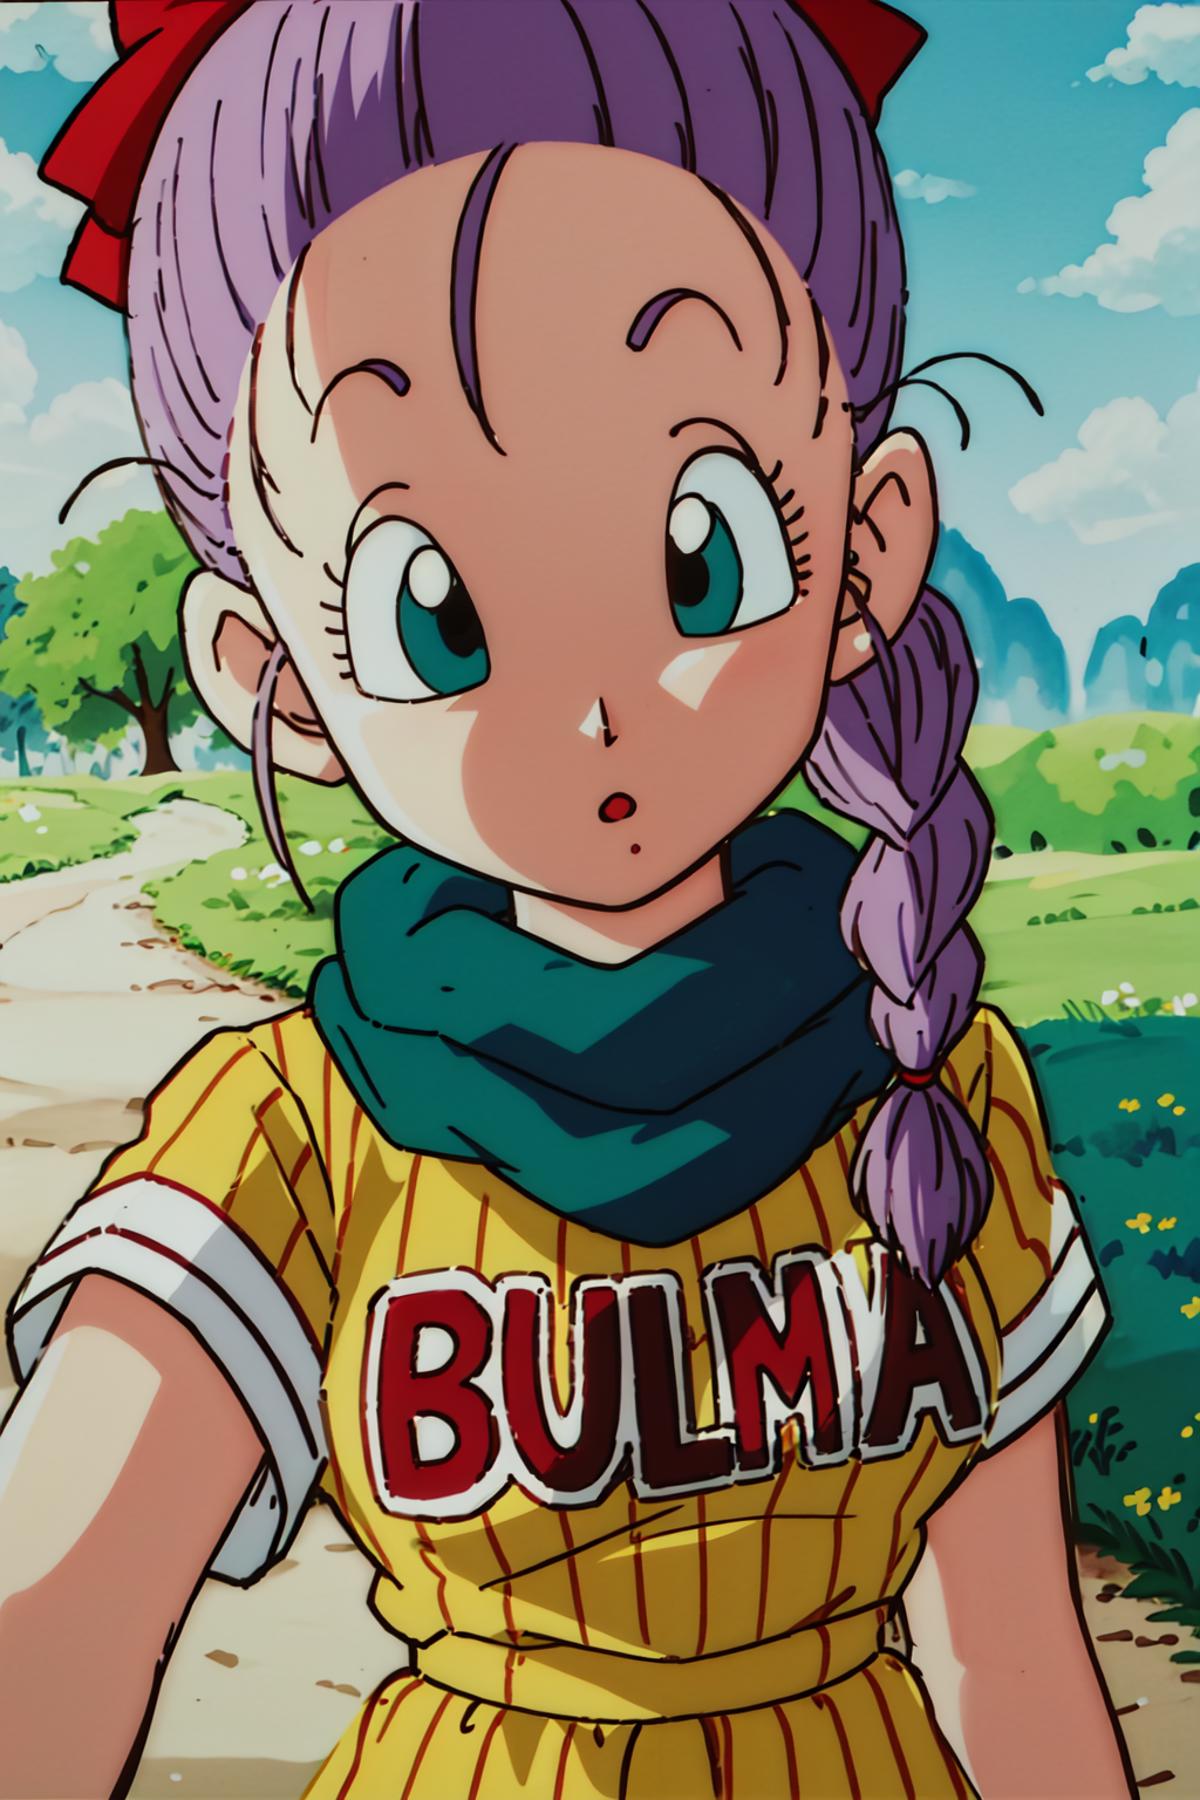 Bulma - Dragon Ball Path to Power image by HerschelLeVerrier